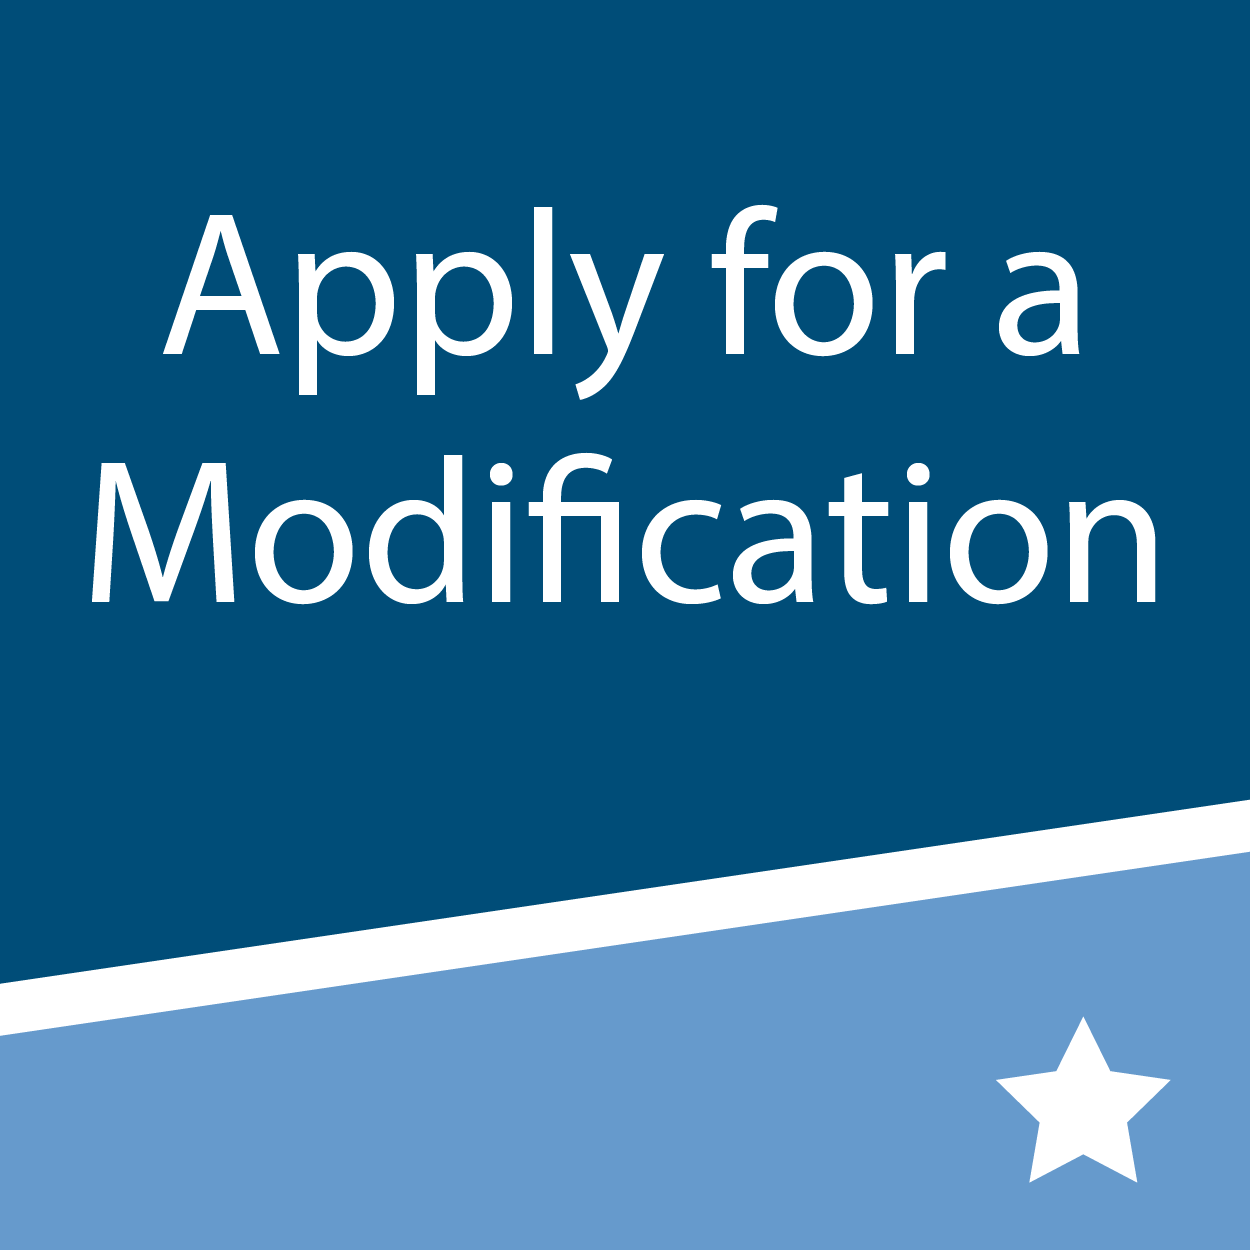 Apply for a Modification